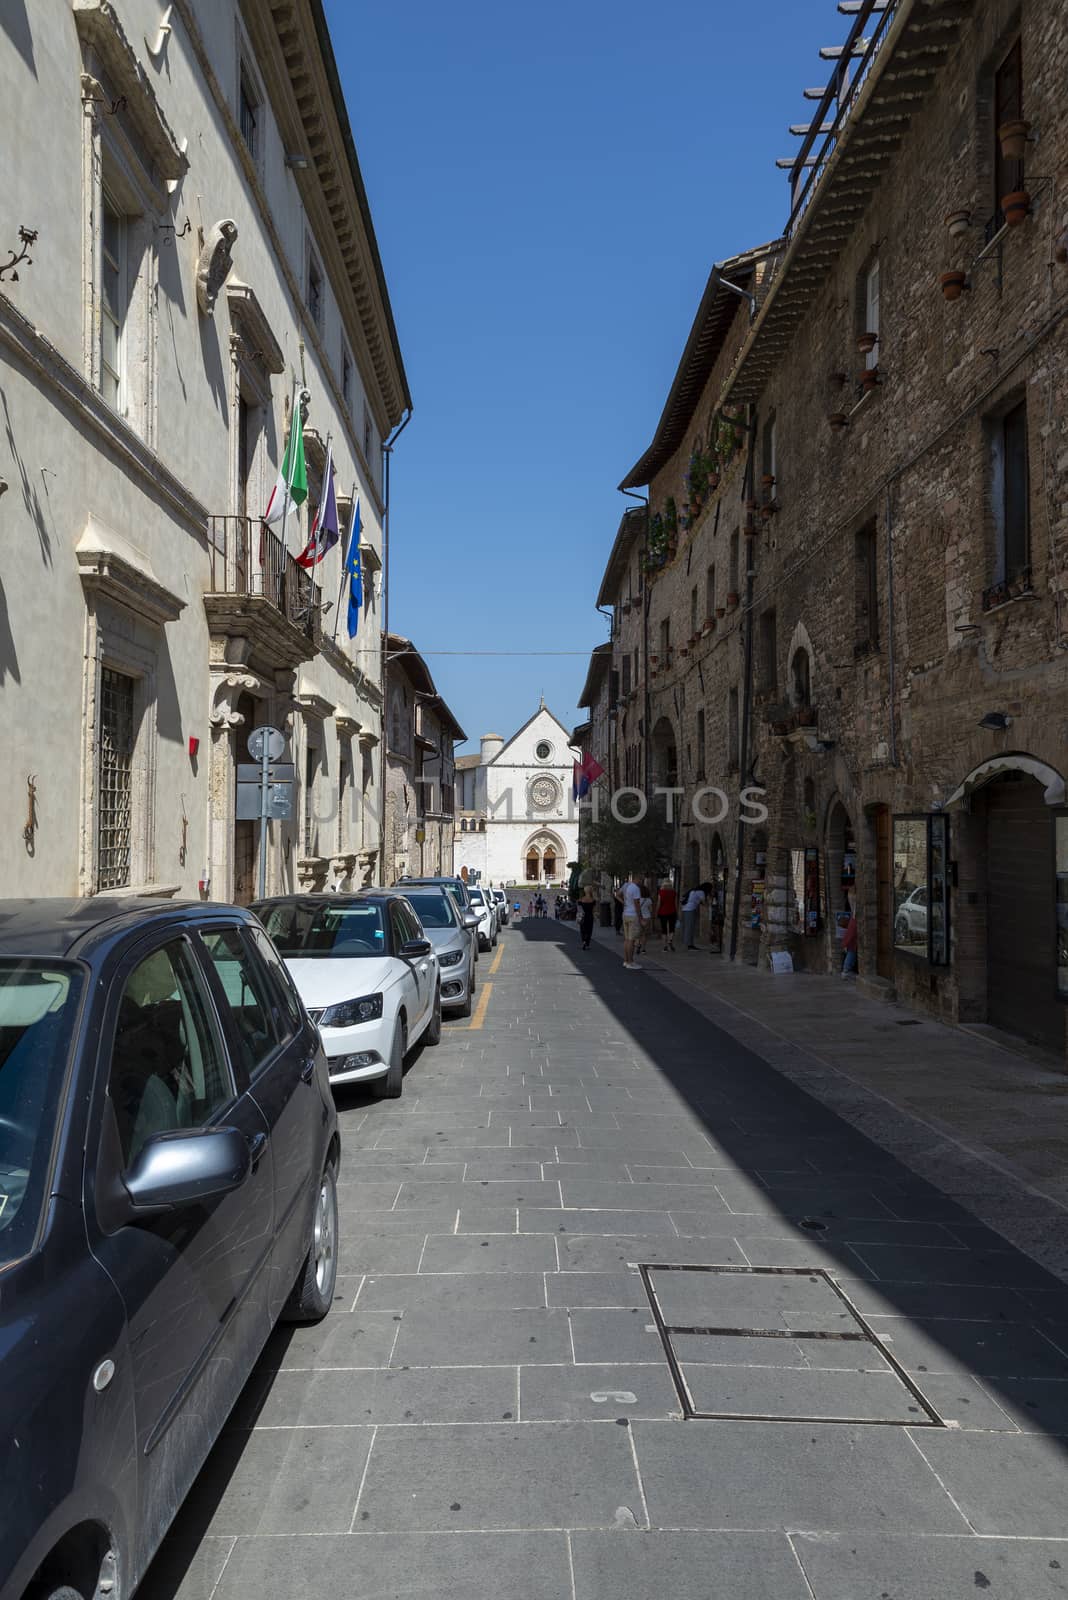 assisi,italy july 11 2020 :street san francesco in the center of assisi